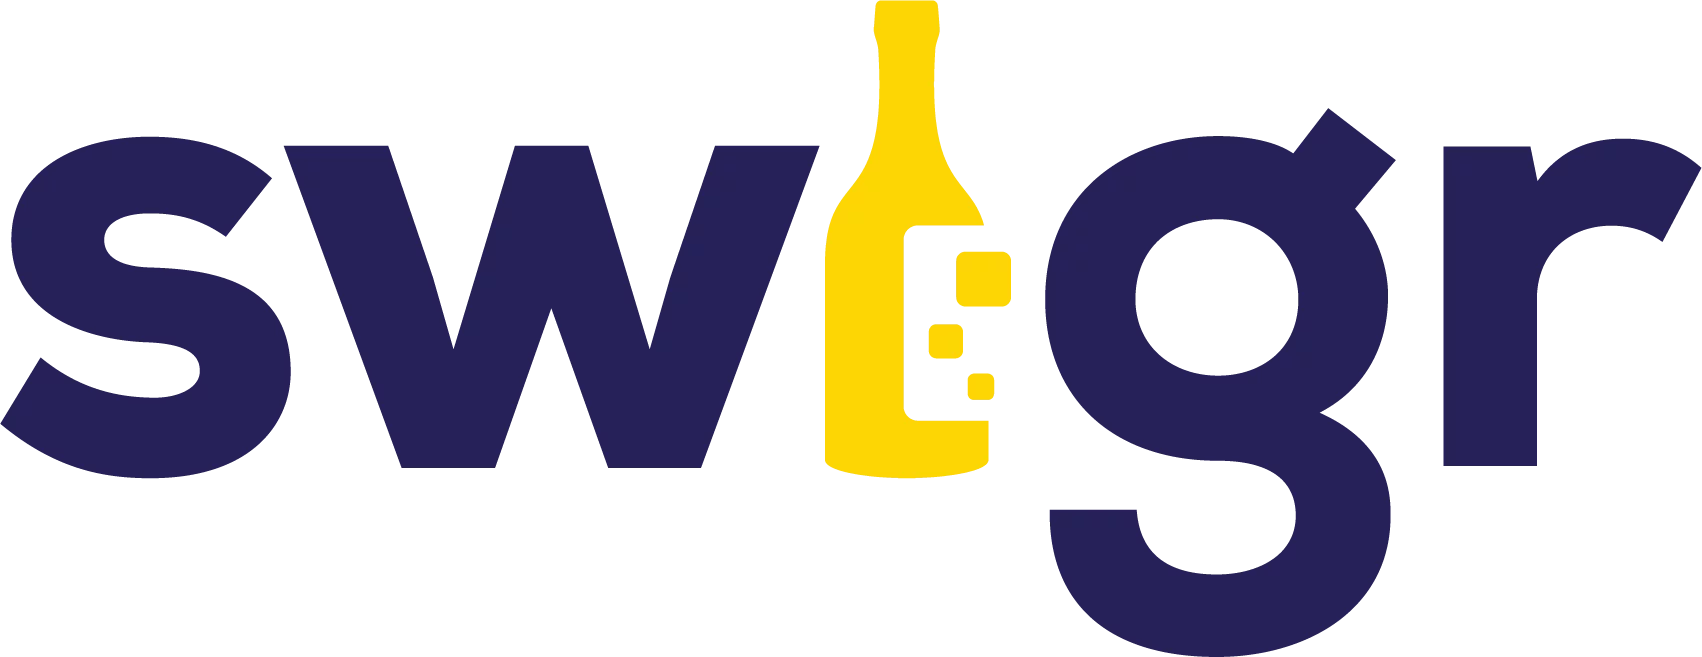 Swigr™- the Leading Augmented Reality Platform for the Beverage Industry